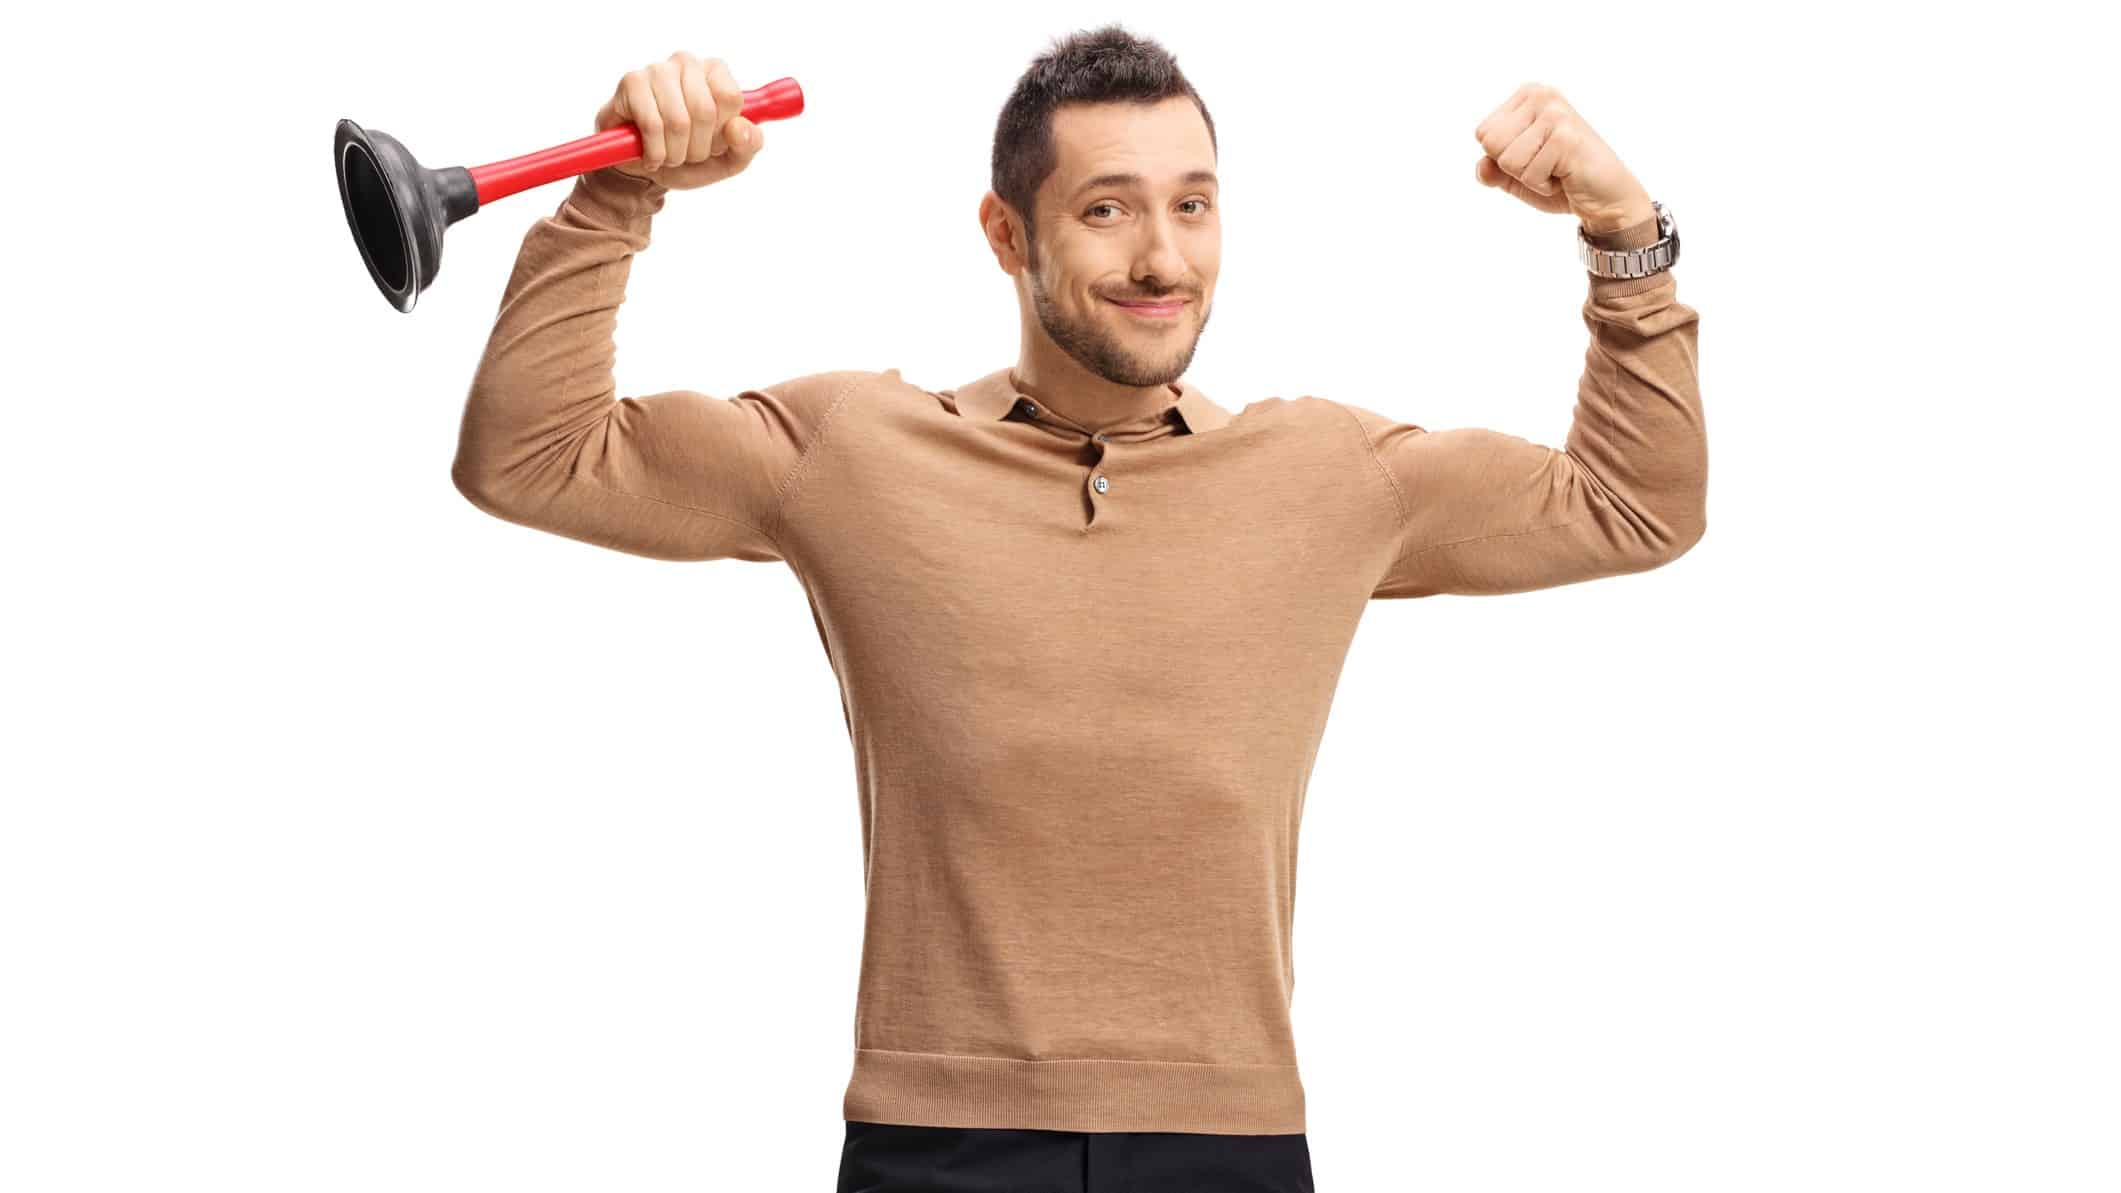 a man holds a plunger while also holding his arms aloft in a pose to show off his muscles and strength with a wry smile on his face.